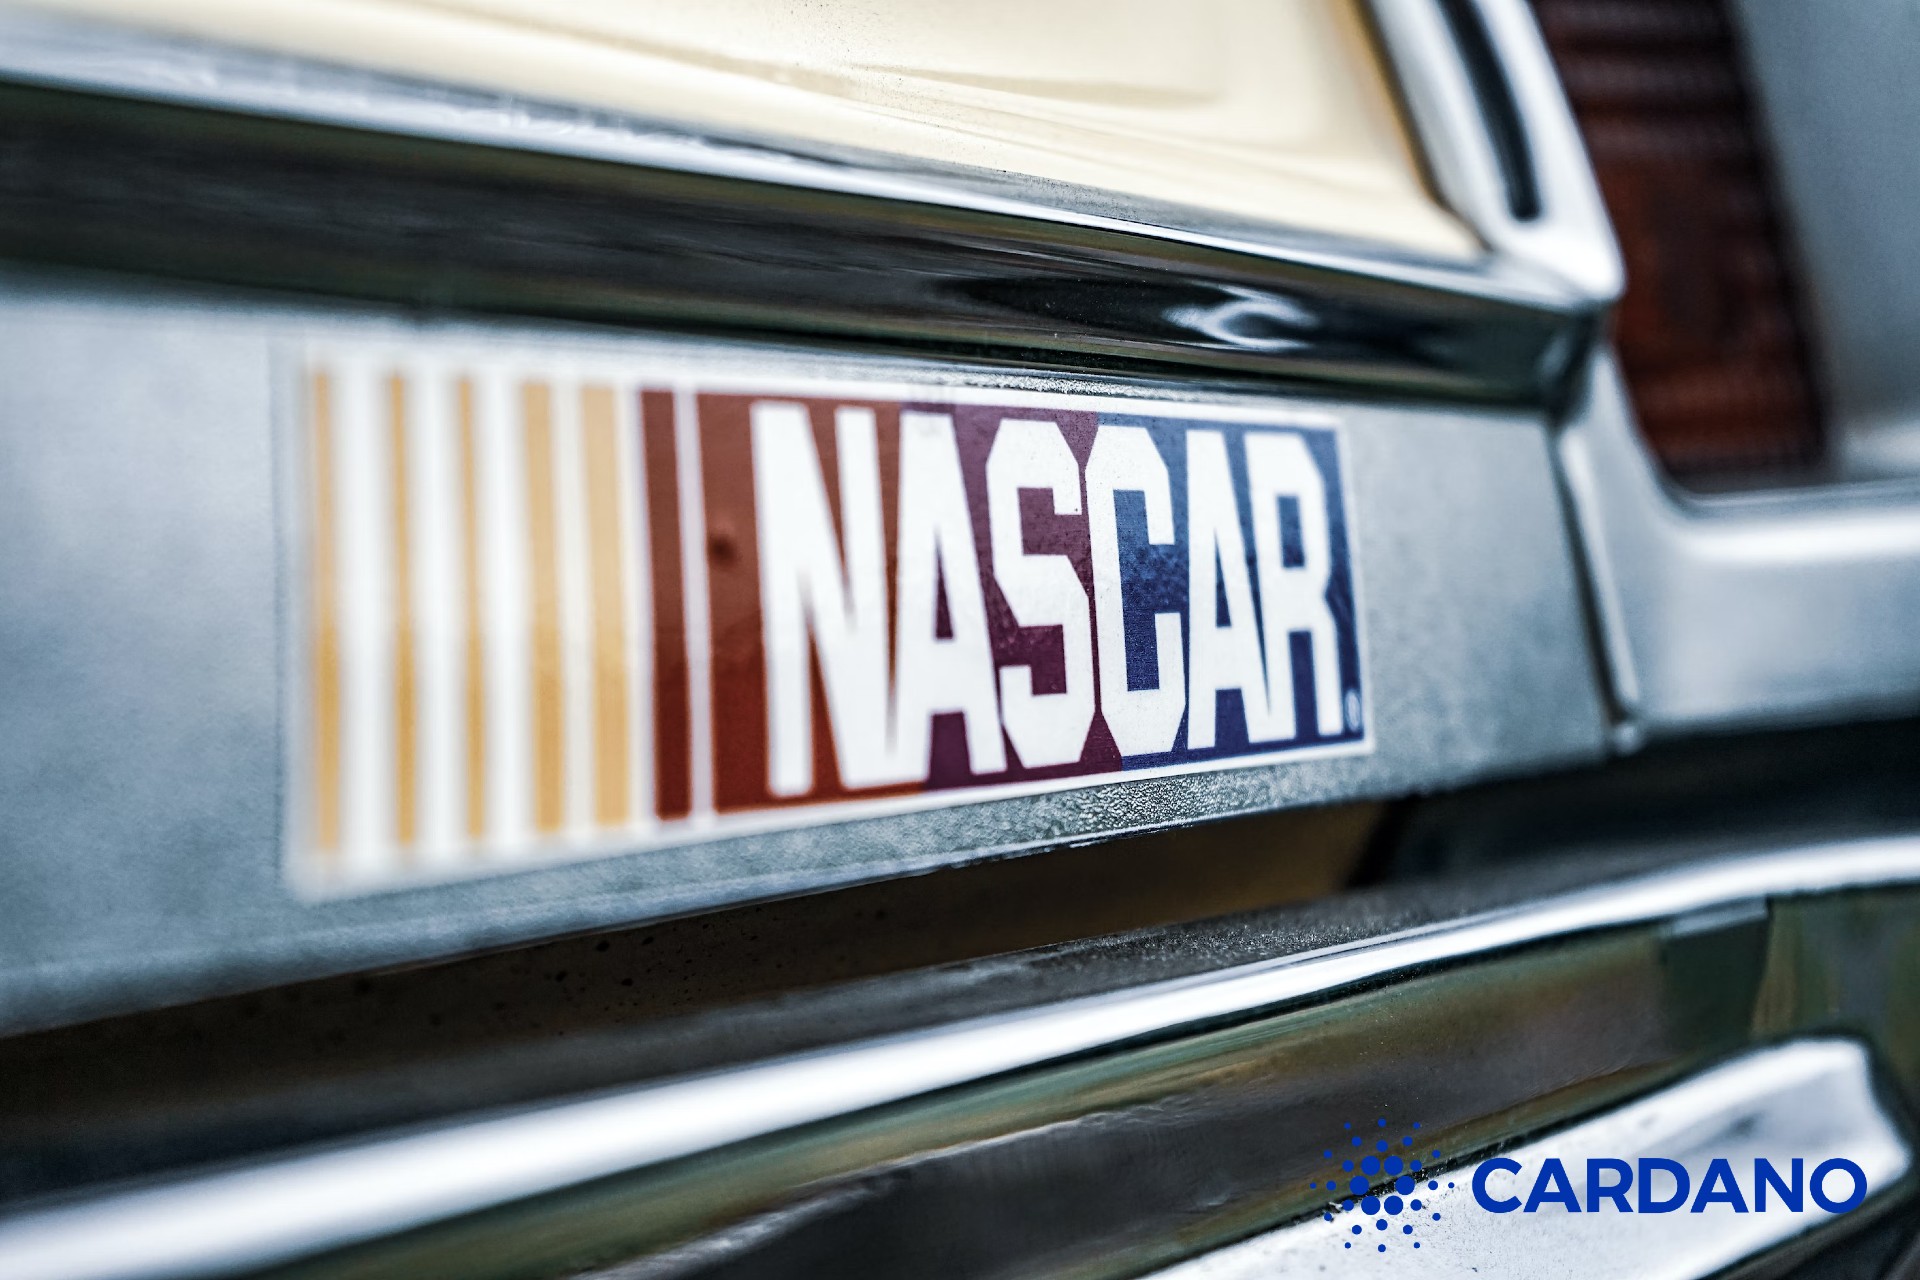 Cardano Community shines as the network enters NASCAR